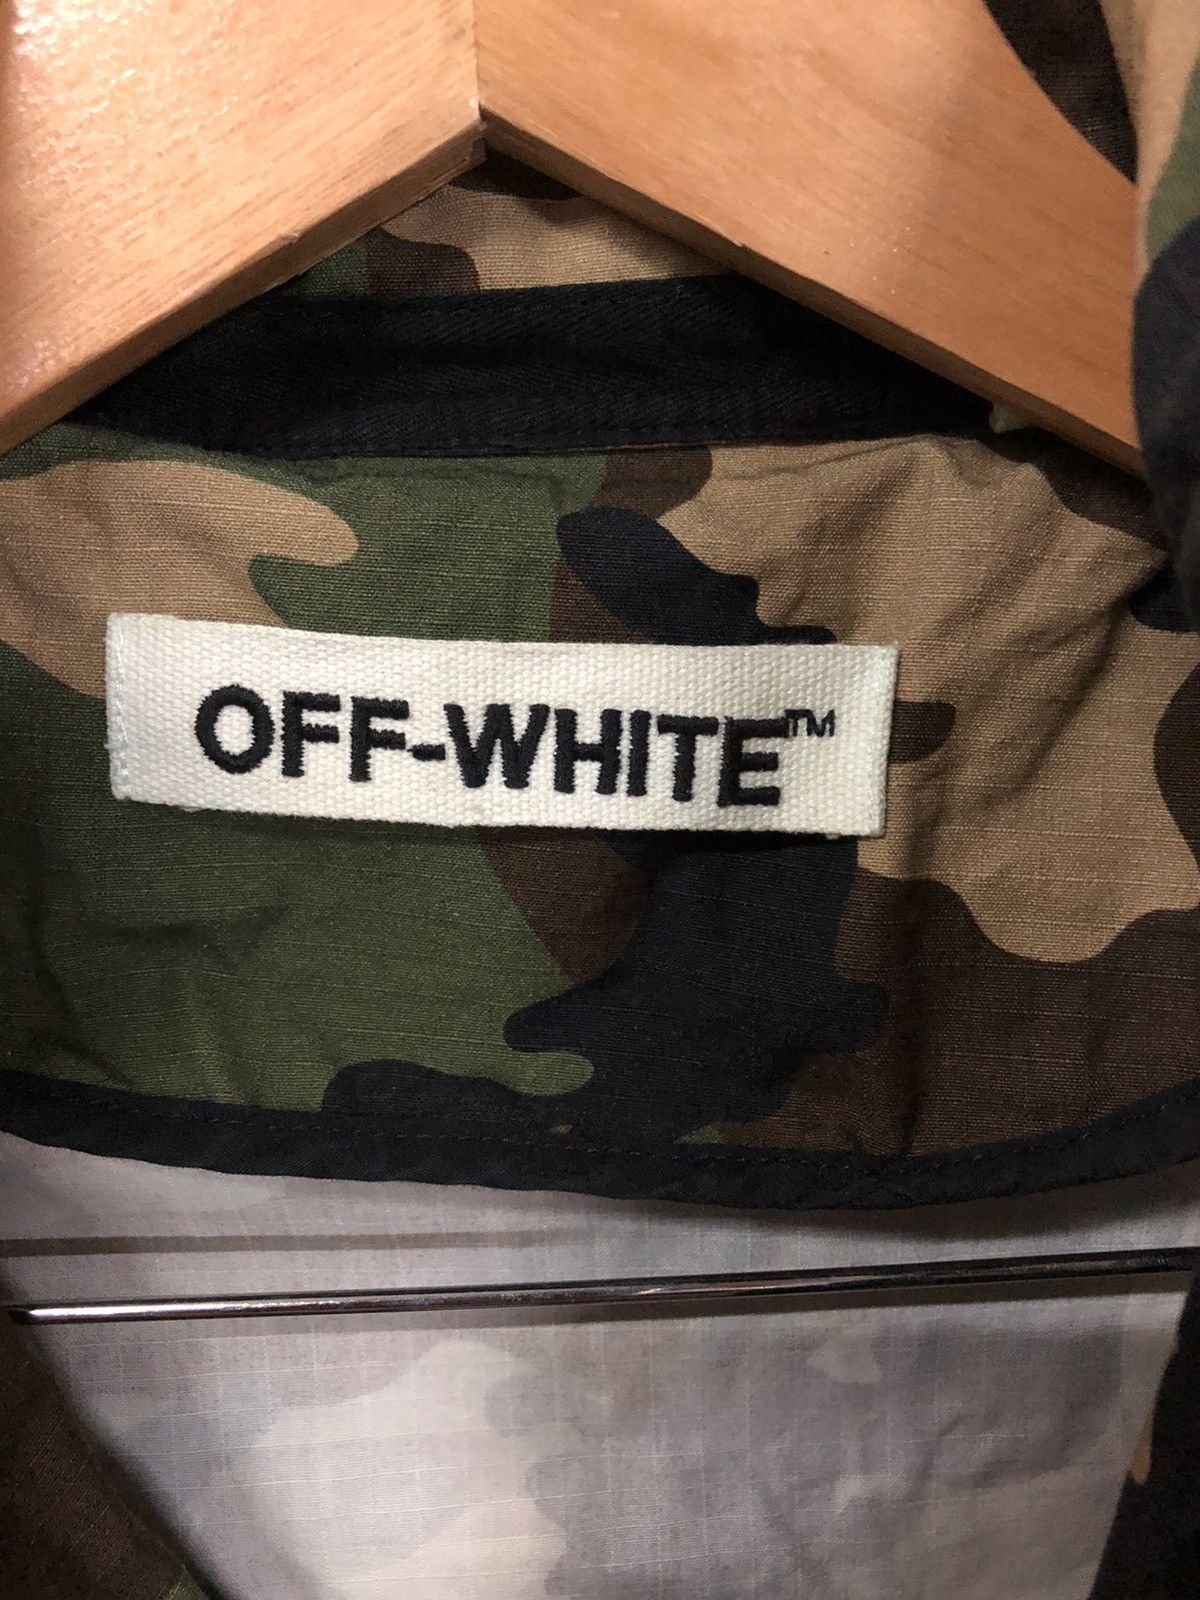 OFF WHITE VIRGIL ABLOH 2016 FALL/WINTER COLLECTION - 14